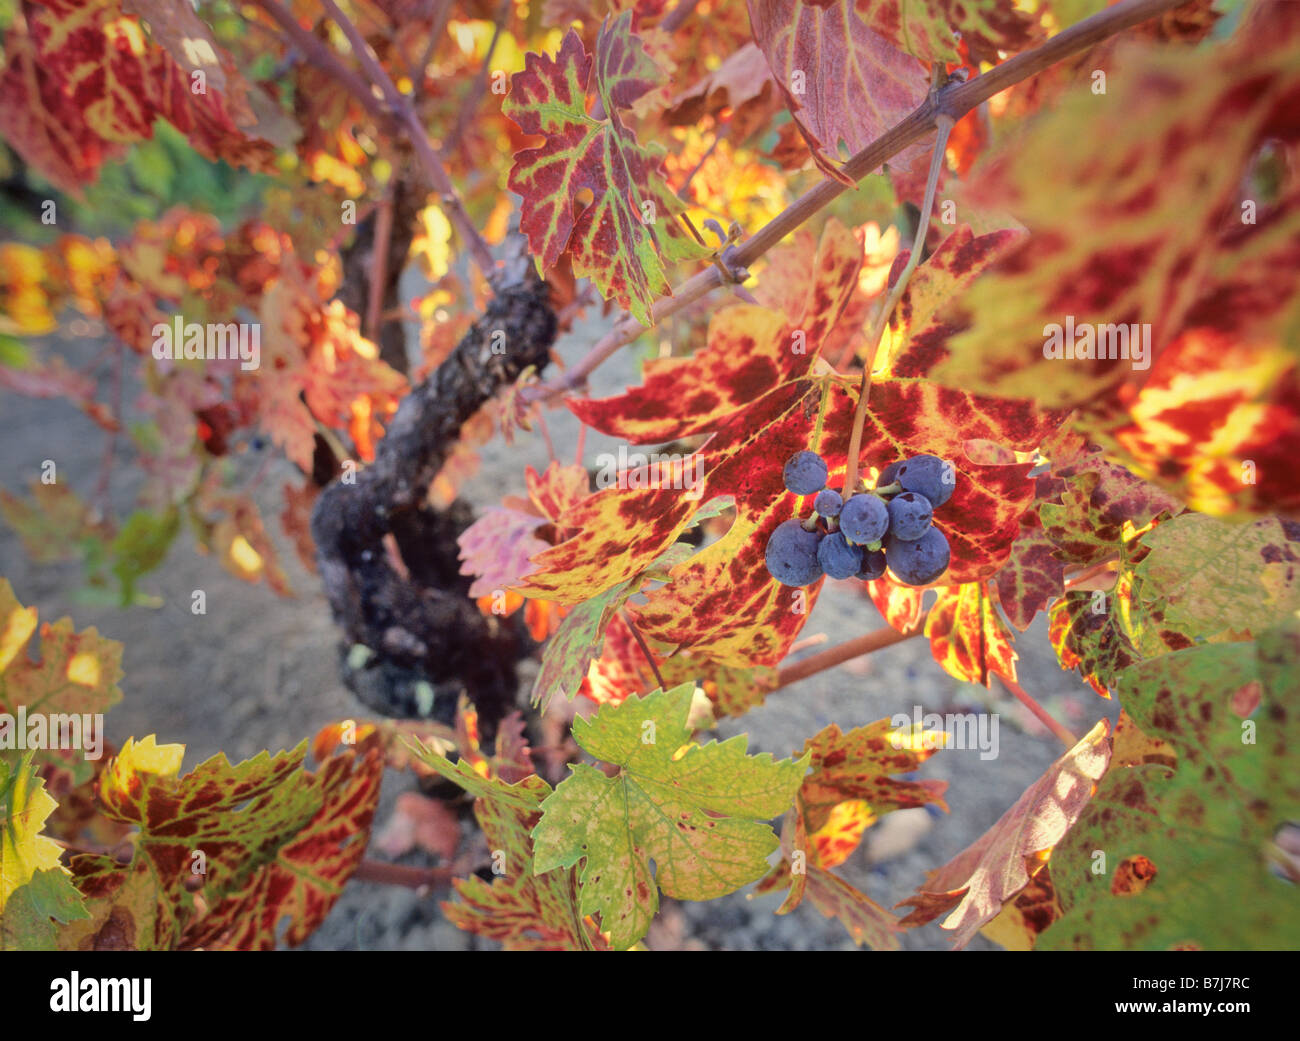 Old butrytis-infected grapevine with red grapes, Napa Valley, California Stock Photo